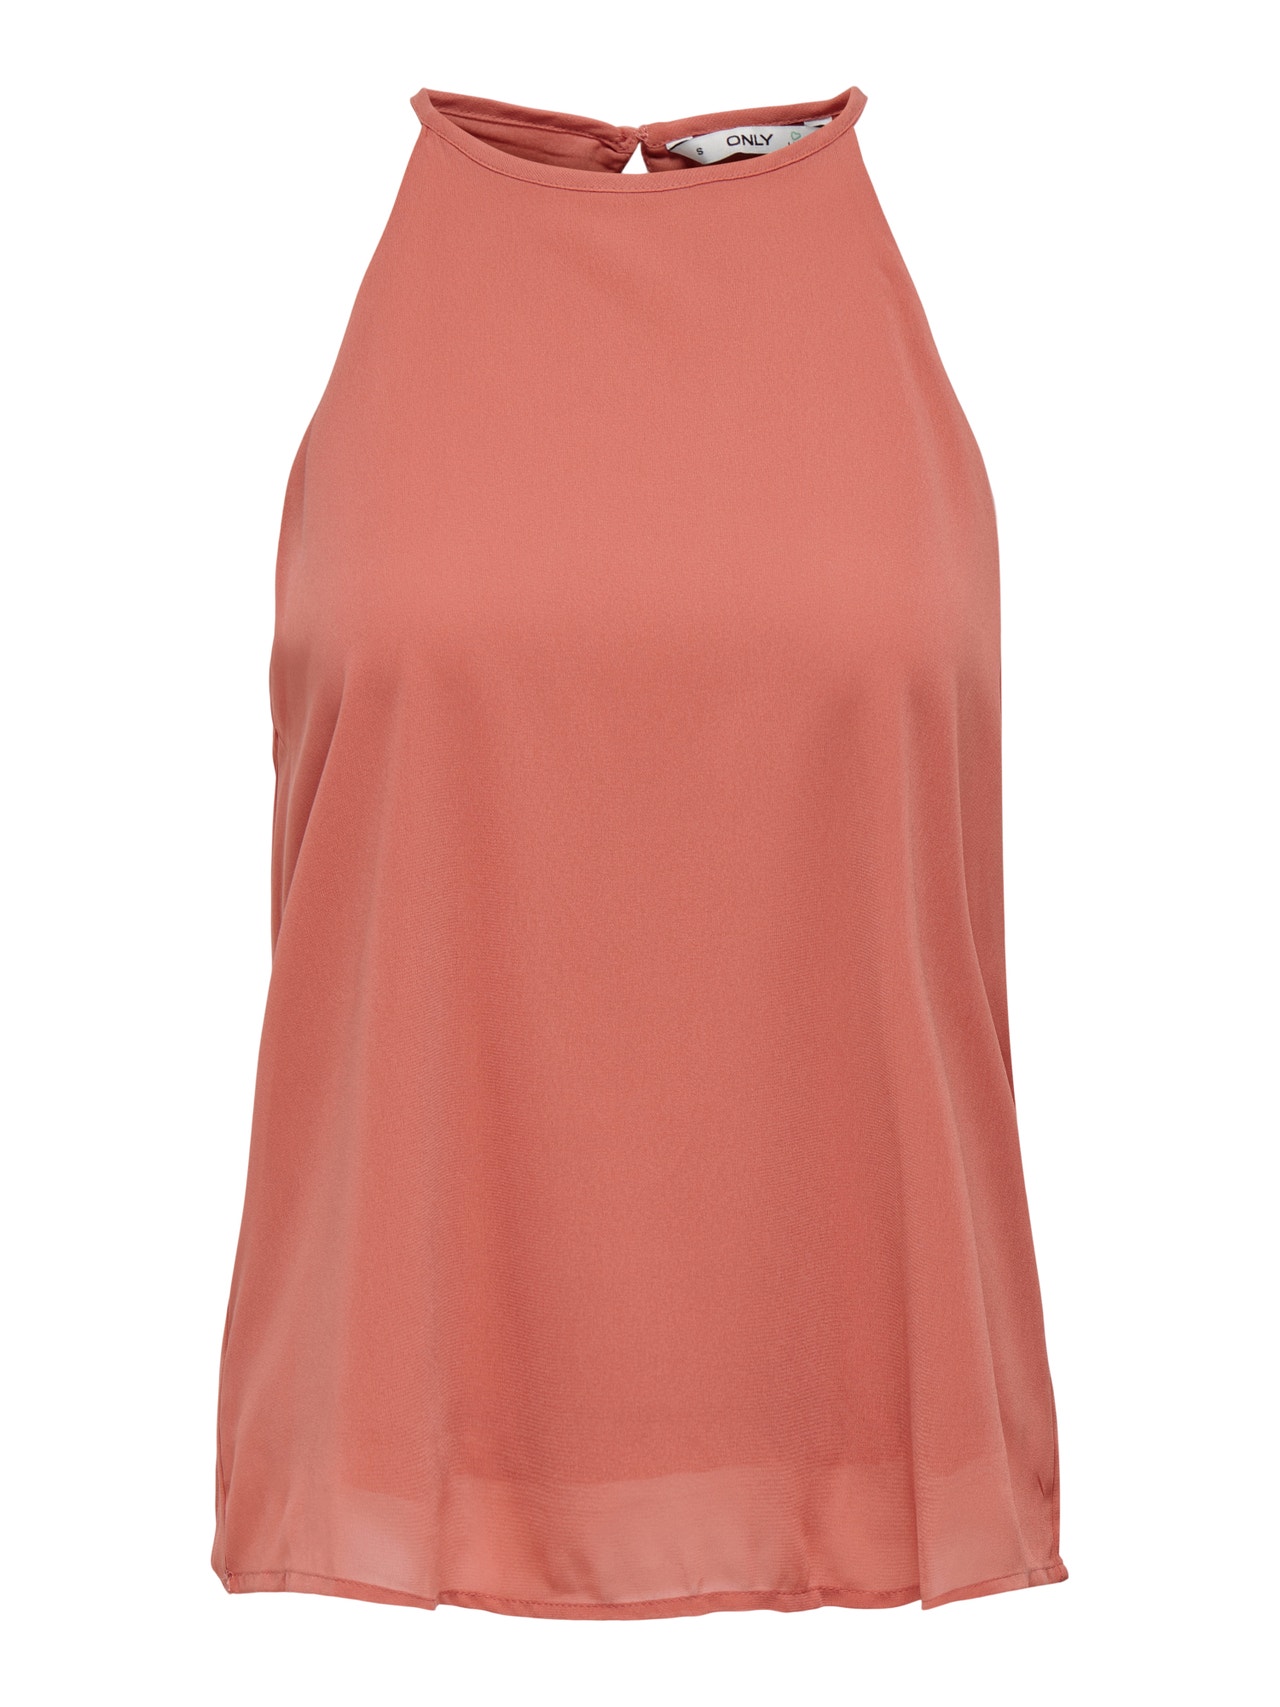 ONLY Halterneck Top med cut-out ryg -Canyon Rose - 15235763